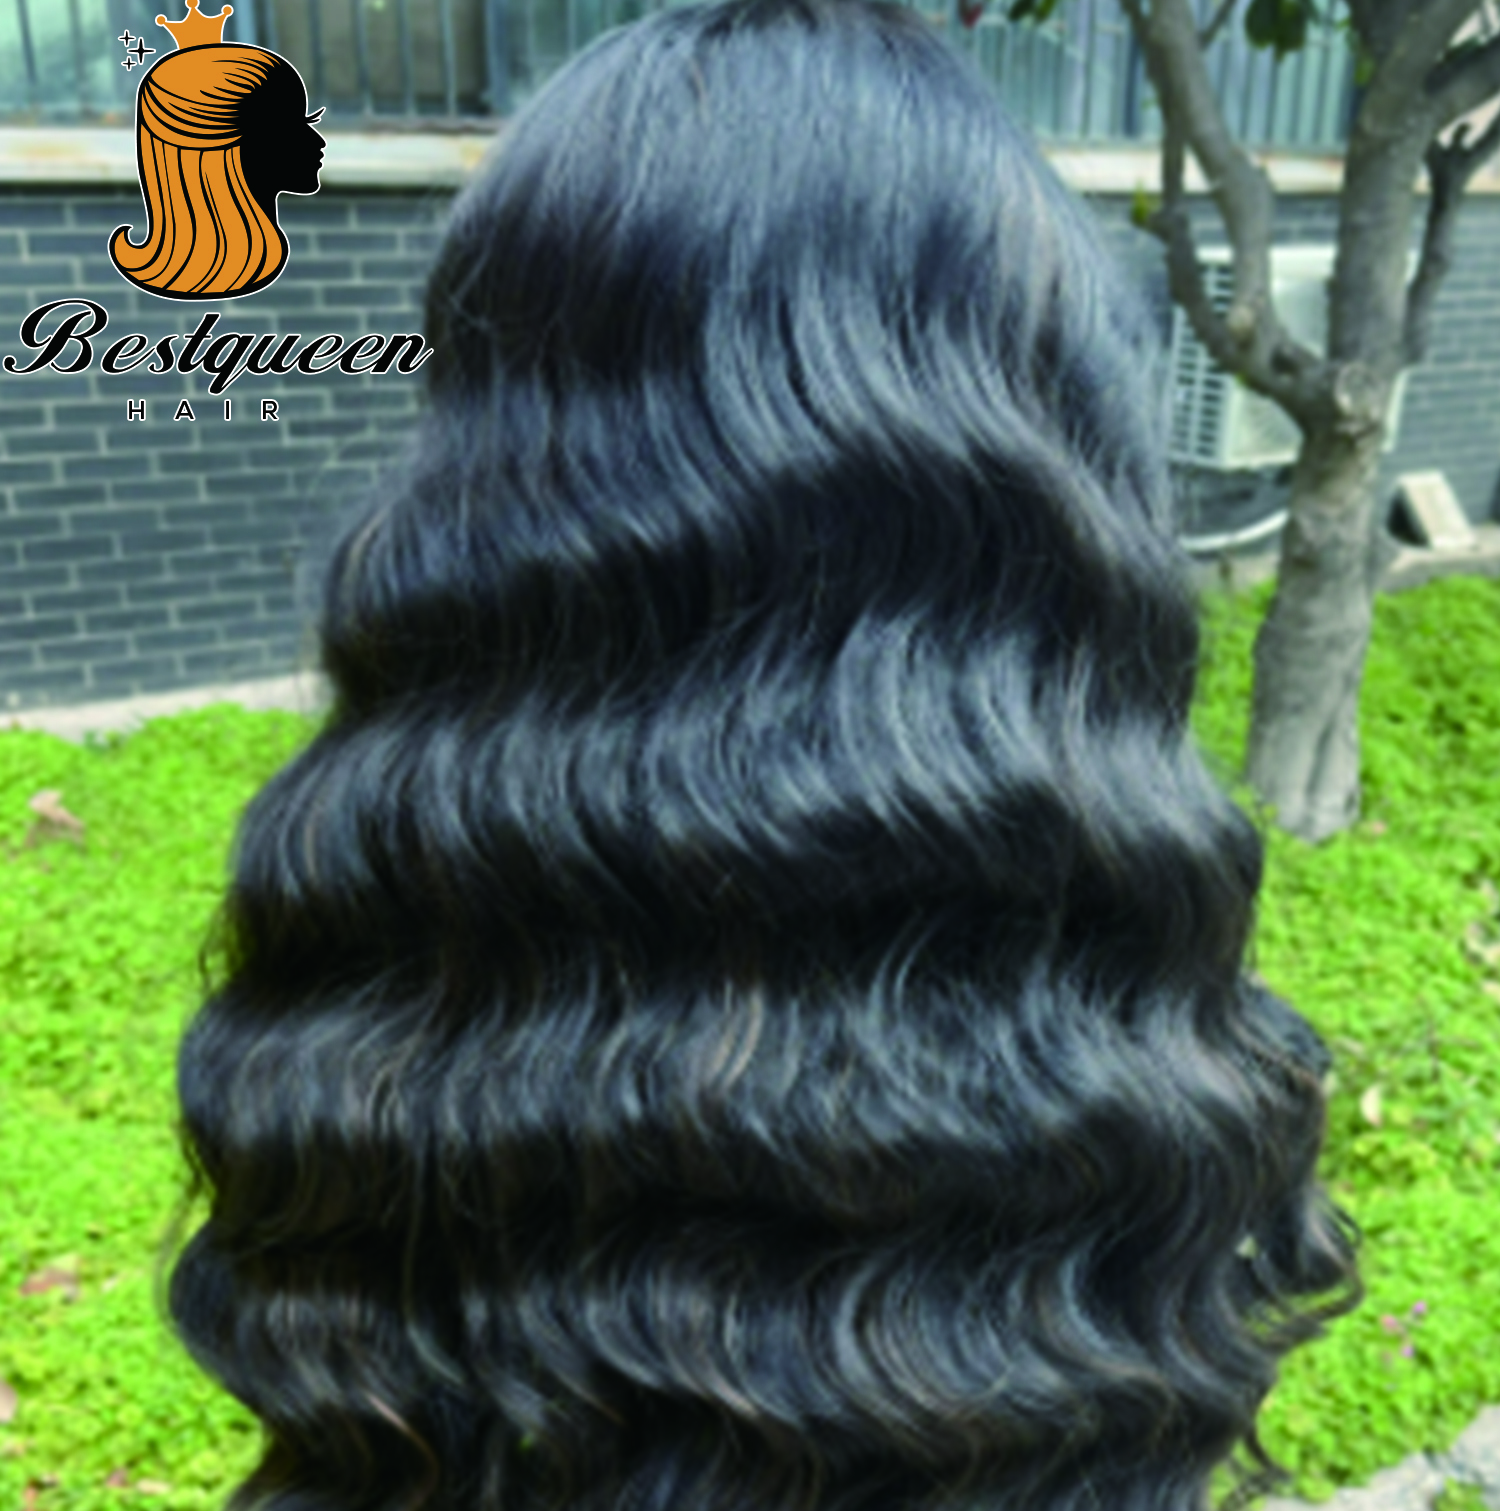 Bestqueen Hair Shipping Overnight Shipping Indian 13x4 Lace Frontal Loose Wave Wig For Black Women Virgin Hair Lace Wig Vendors  